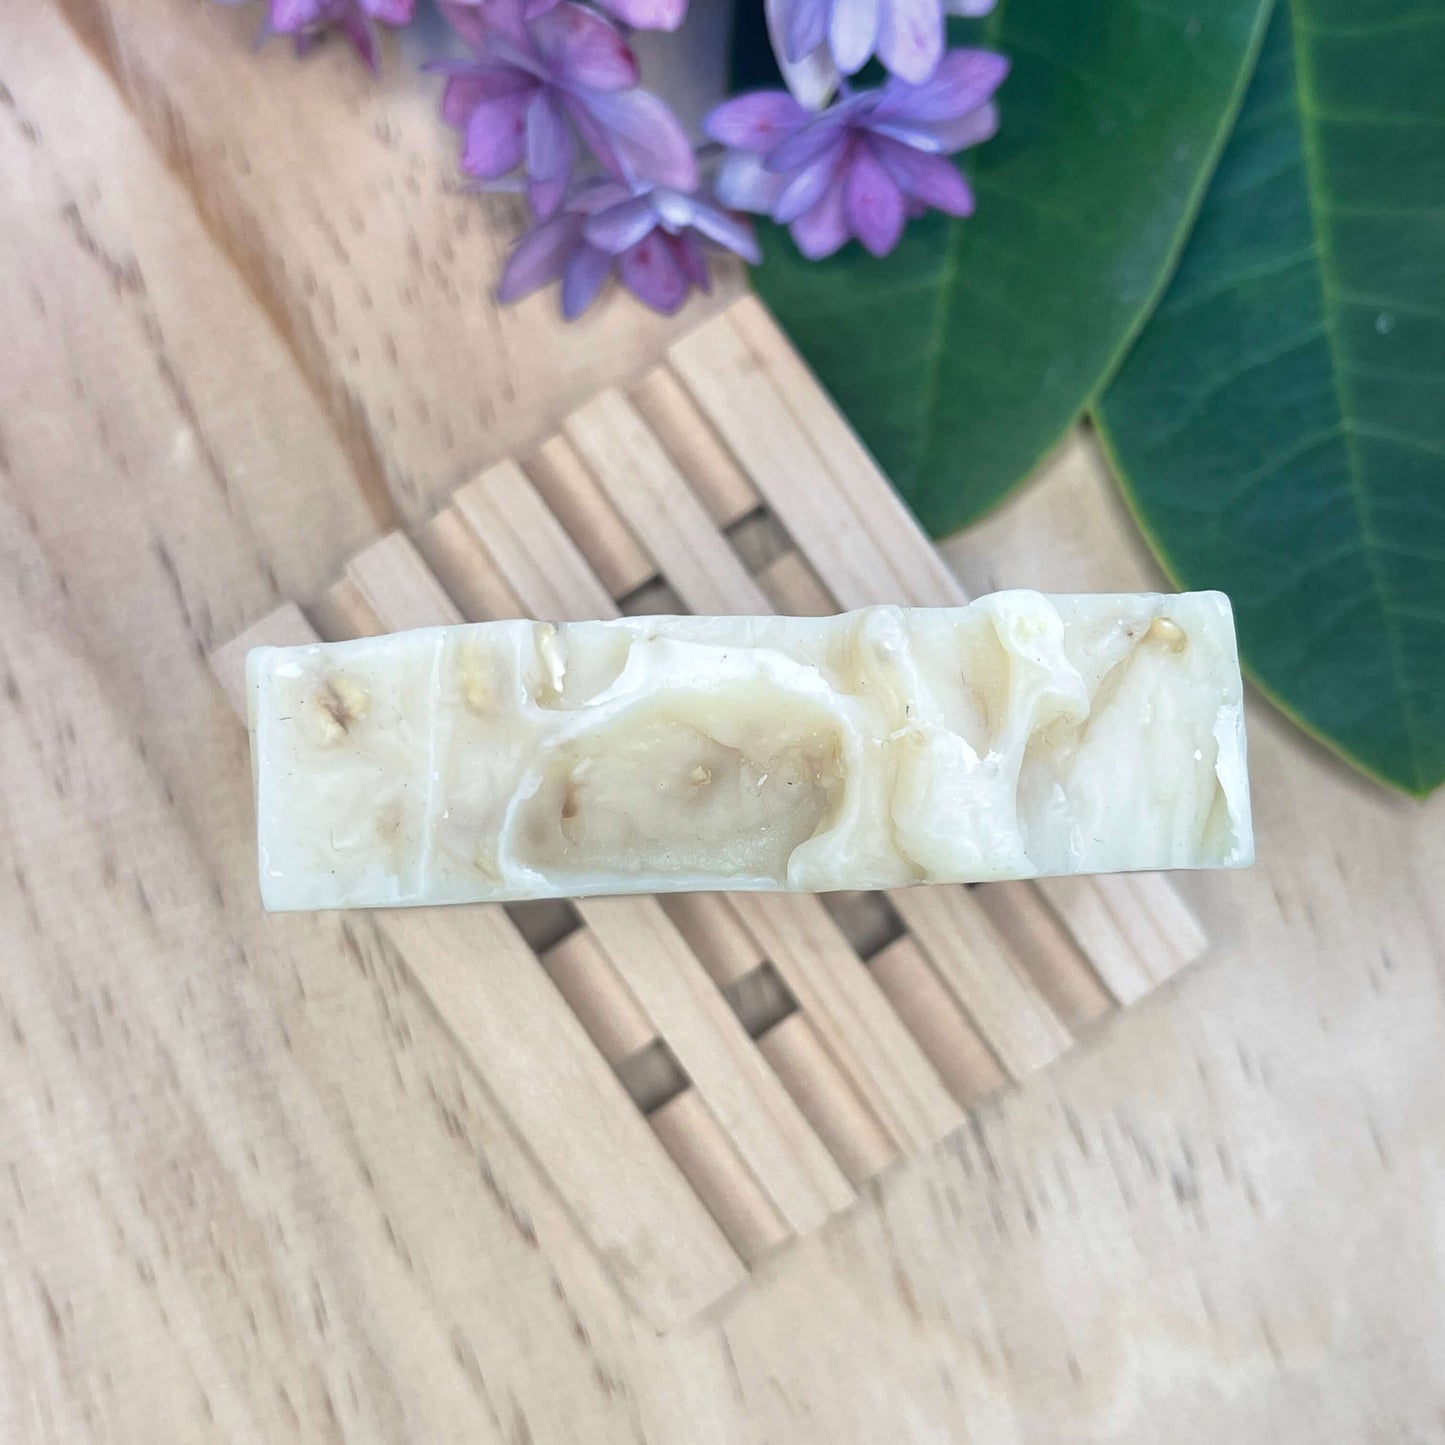 Natural soap on a wooden soap rack.